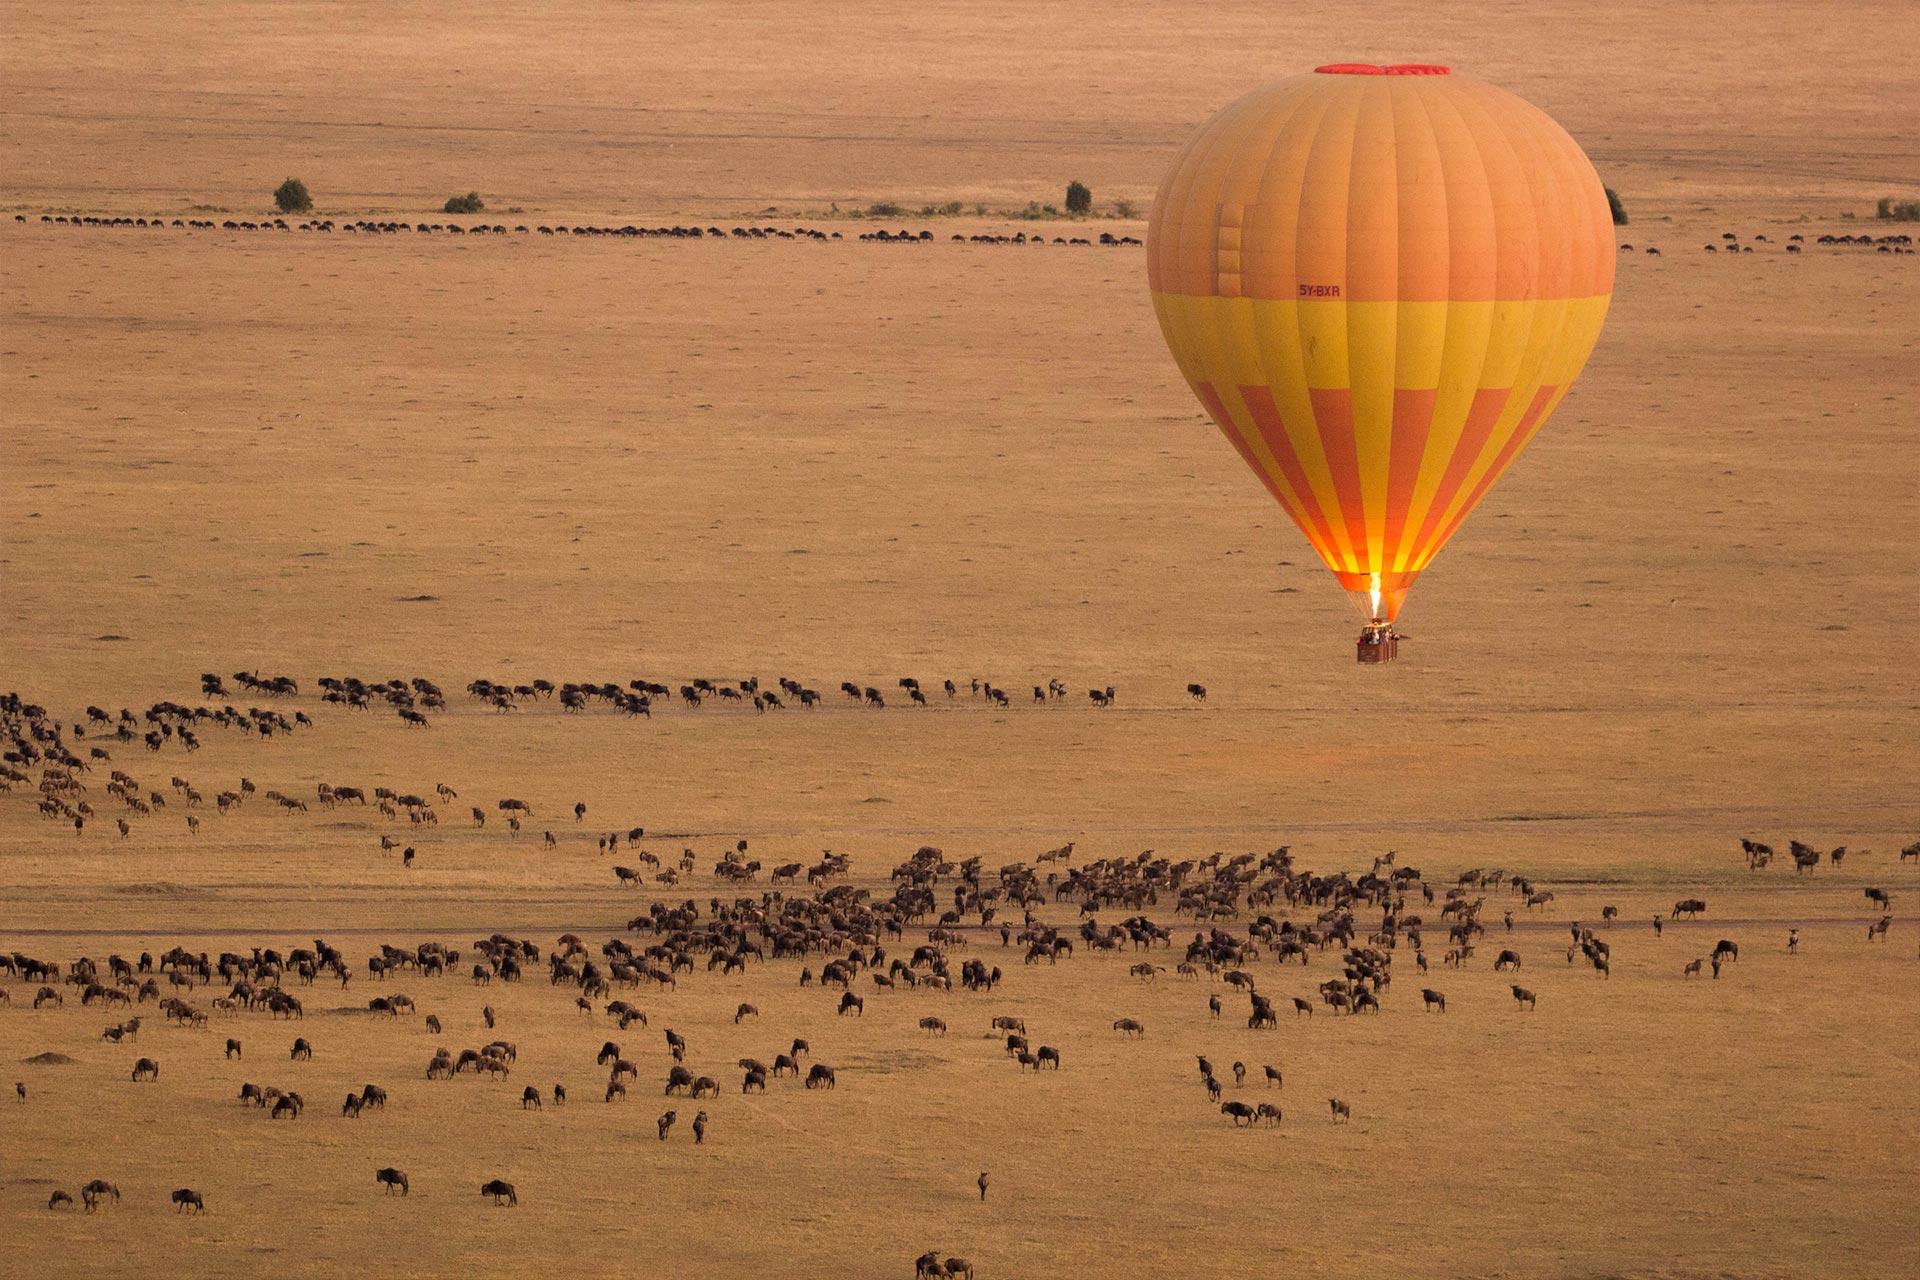 Balloon safaris offer a unique view of the Serengeti National Park